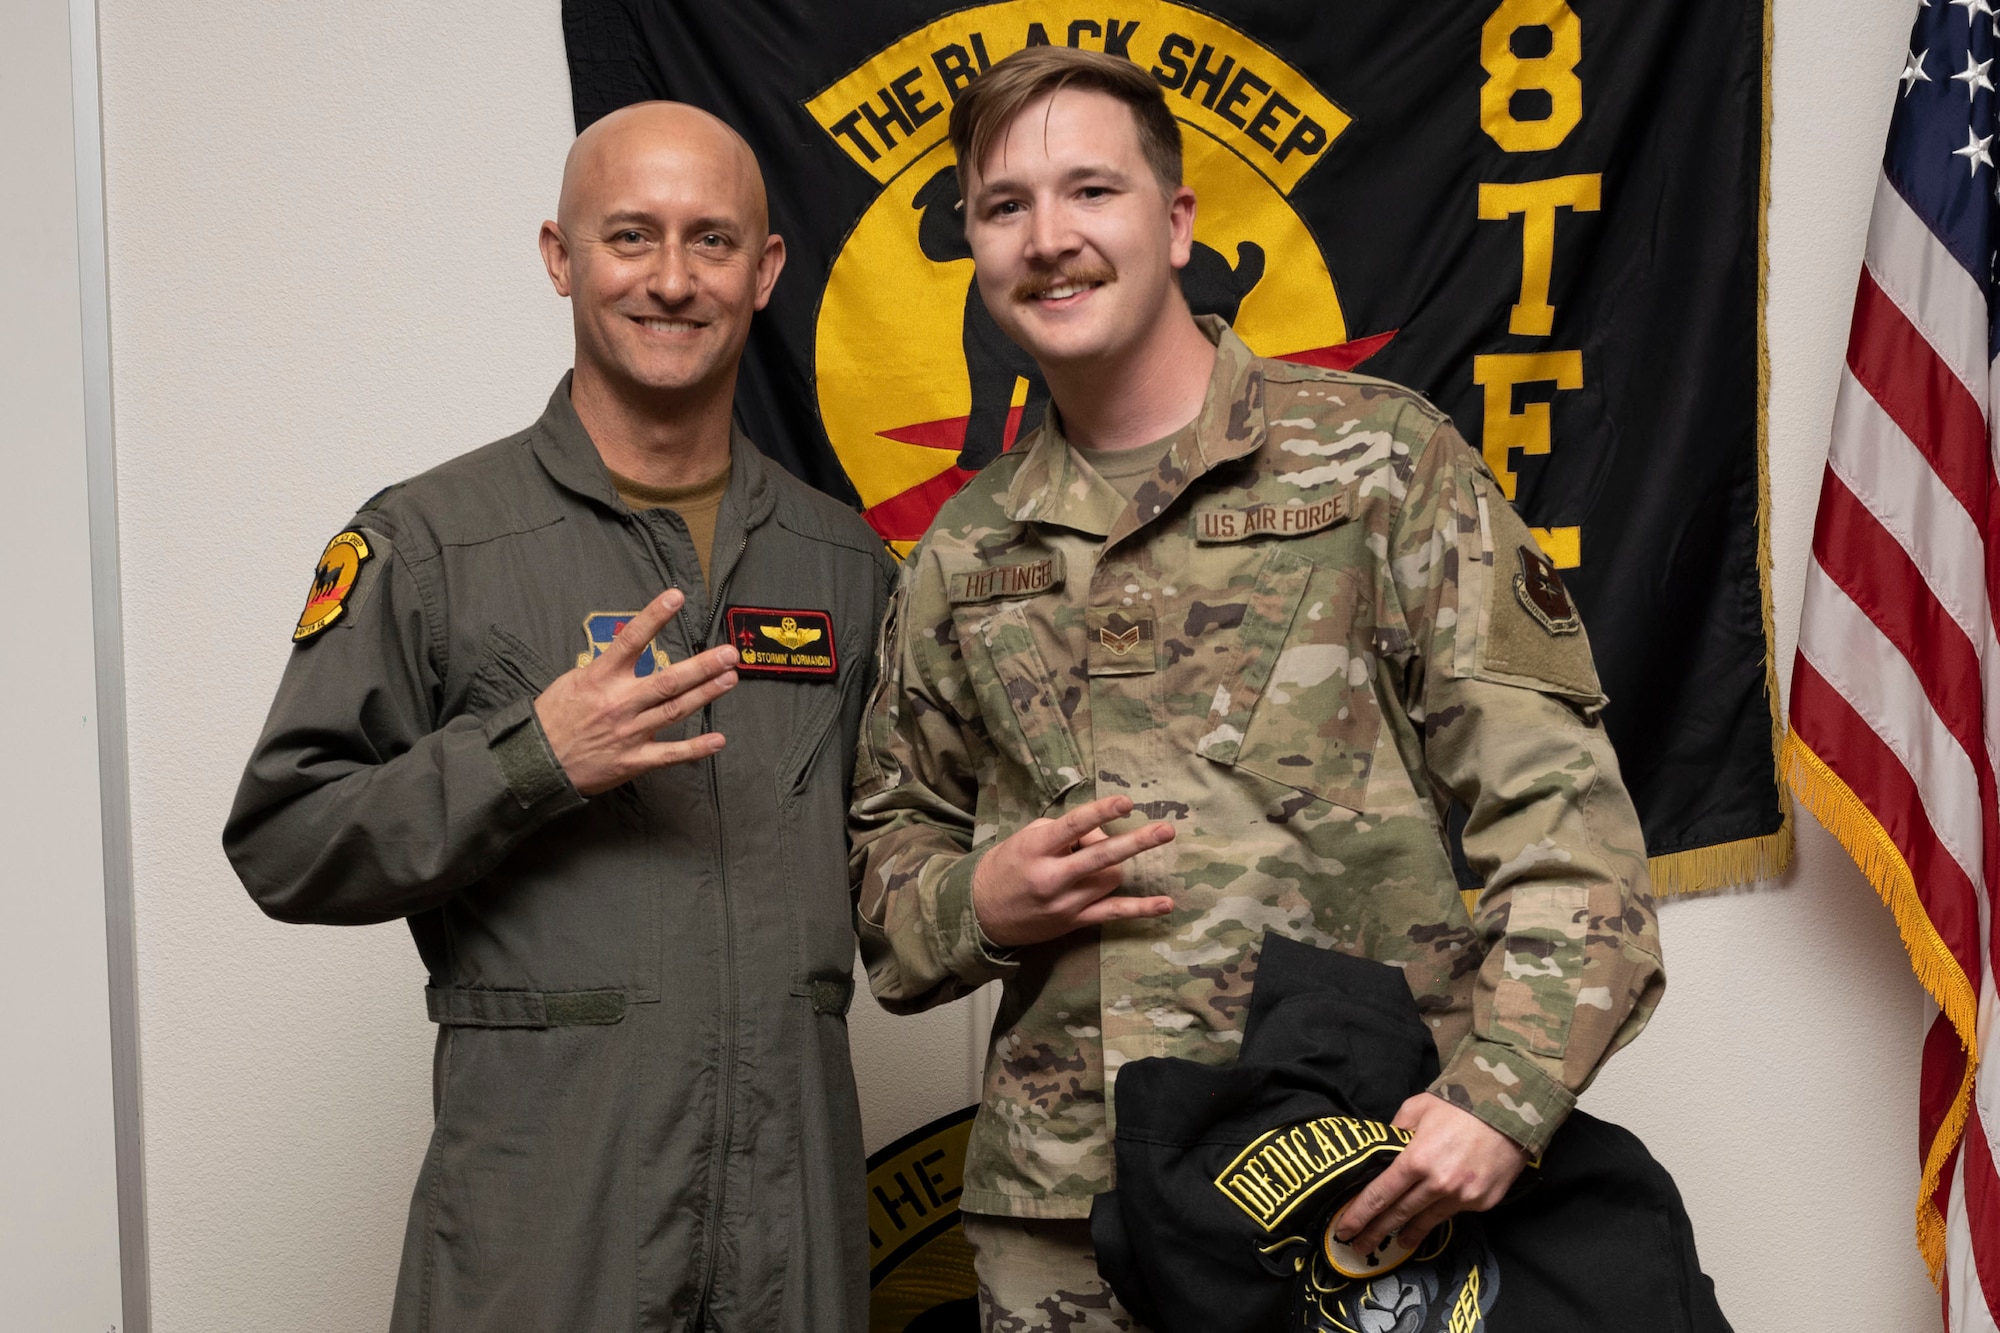 U.S. Air Force Senior Airman Brandon Hettinger, 8th Aircraft Maintenance Unit crew chief, right, poses for a photo with U.S. Air Force Lt. Col. George Normandin, 8th Fighter Squadron commander, during a Dedicated Crew Chief Appointment ceremony at Holloman Air Force Base, New Mexico, Jan. 3, 2022. To receive the title of DCC, a crew chief must demonstrate a history of superior performance in their career, comply with all safety practices and complete all required training. (U.S. Air Force photo by Senior Airman Antonio Salfran)